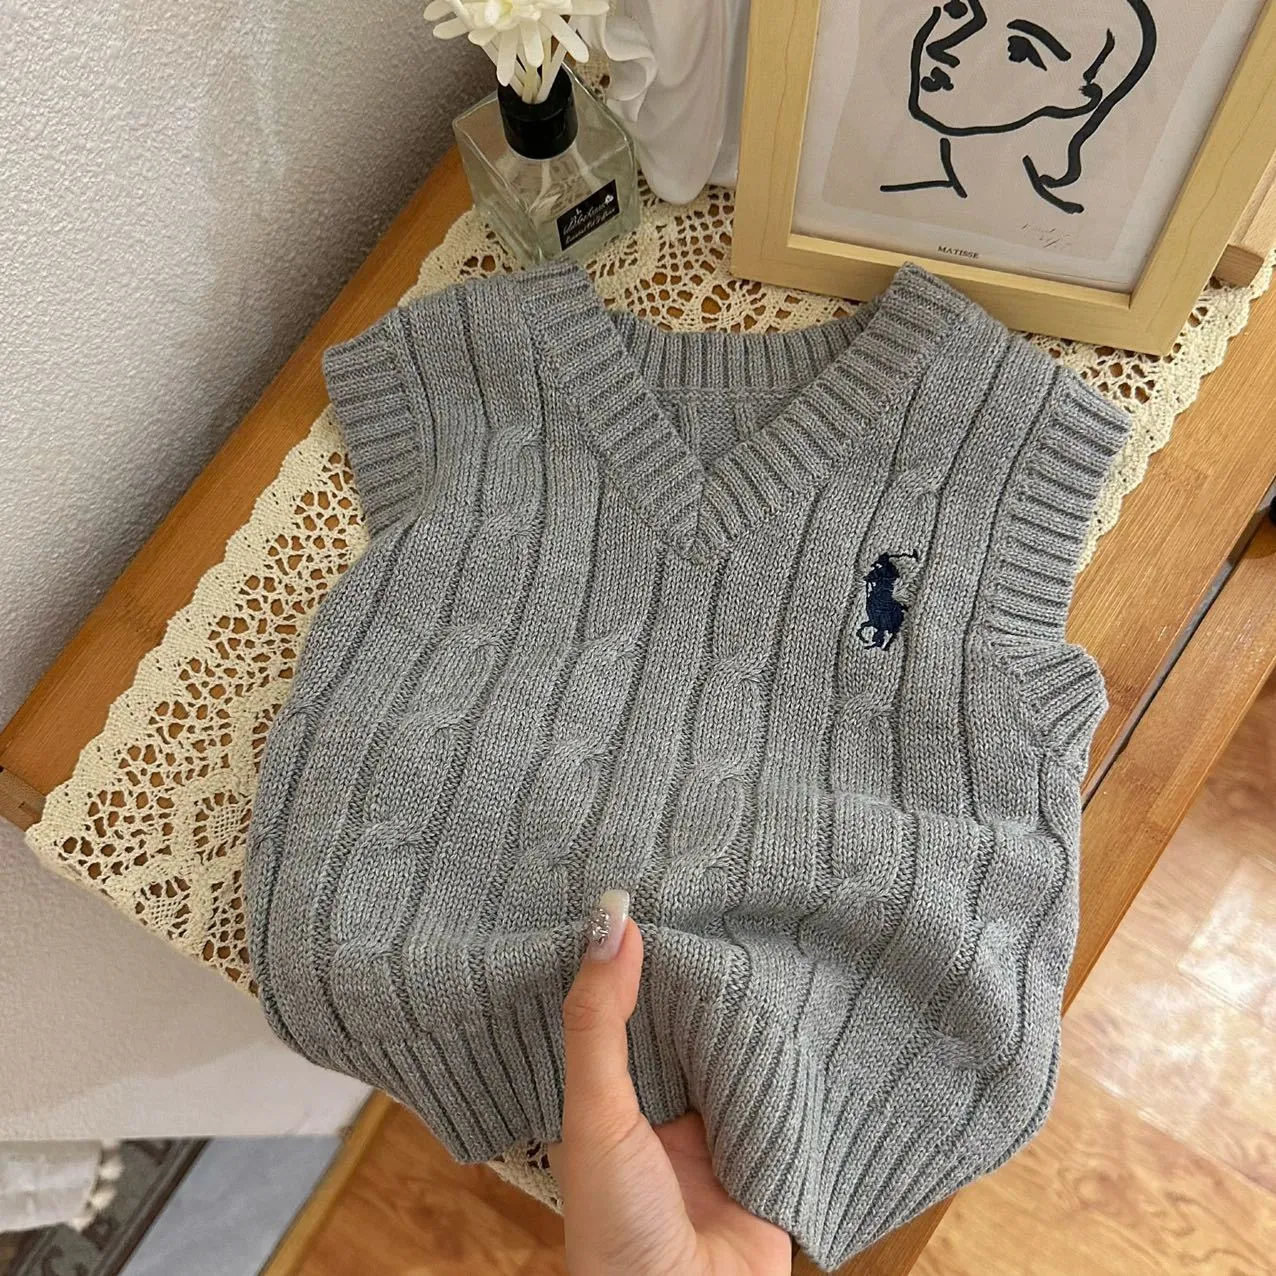 Thick Children Sweater Vest Needle Sleeveless Pullover V-Neck Knitting Sweater Tops Thread Trimming Boys Sweater 2-7T